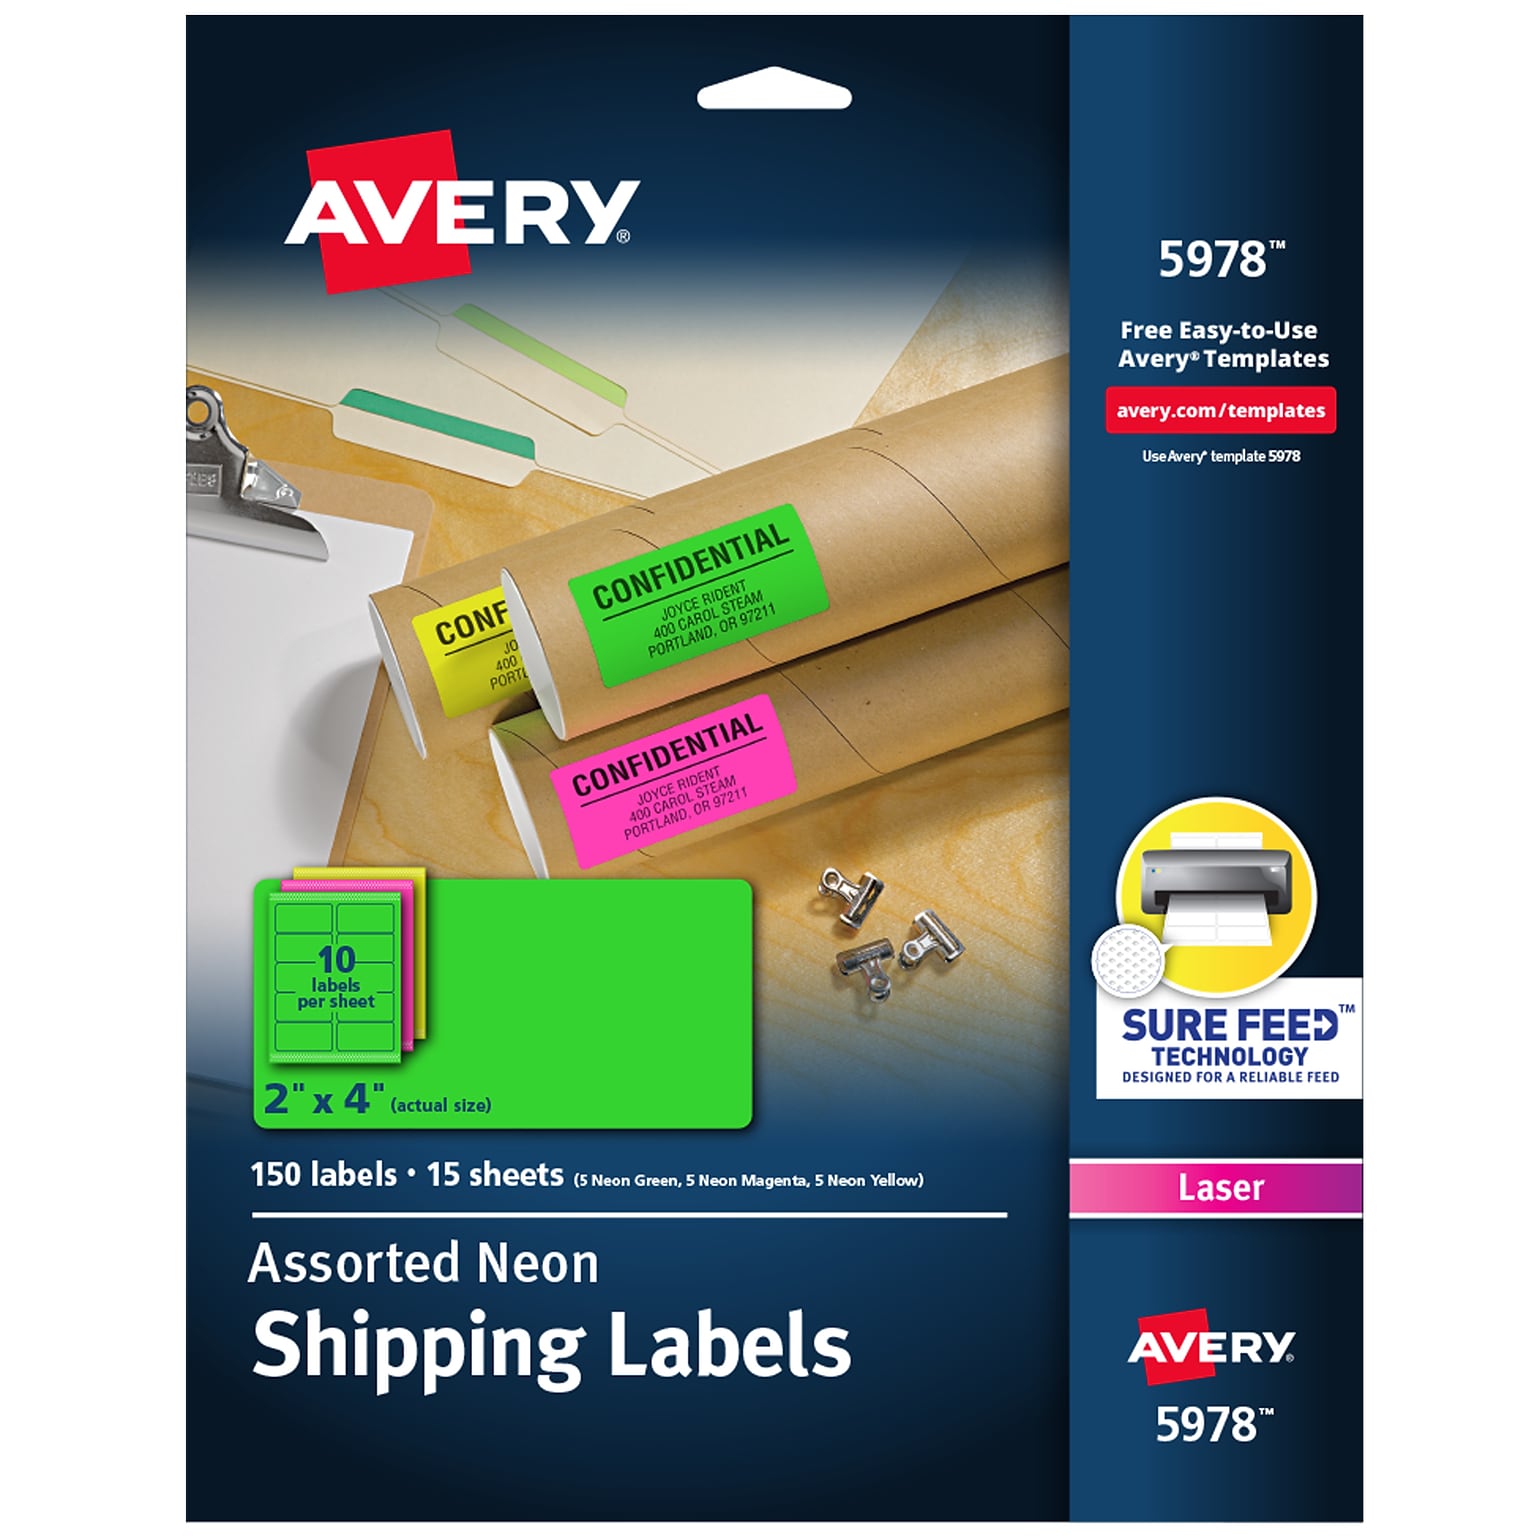 Avery Sure Feed Laser Shipping Labels, 2 x 4, Assorted Neon Colors, 10 Labels/Sheet, 15 Sheets/Pack (5978)